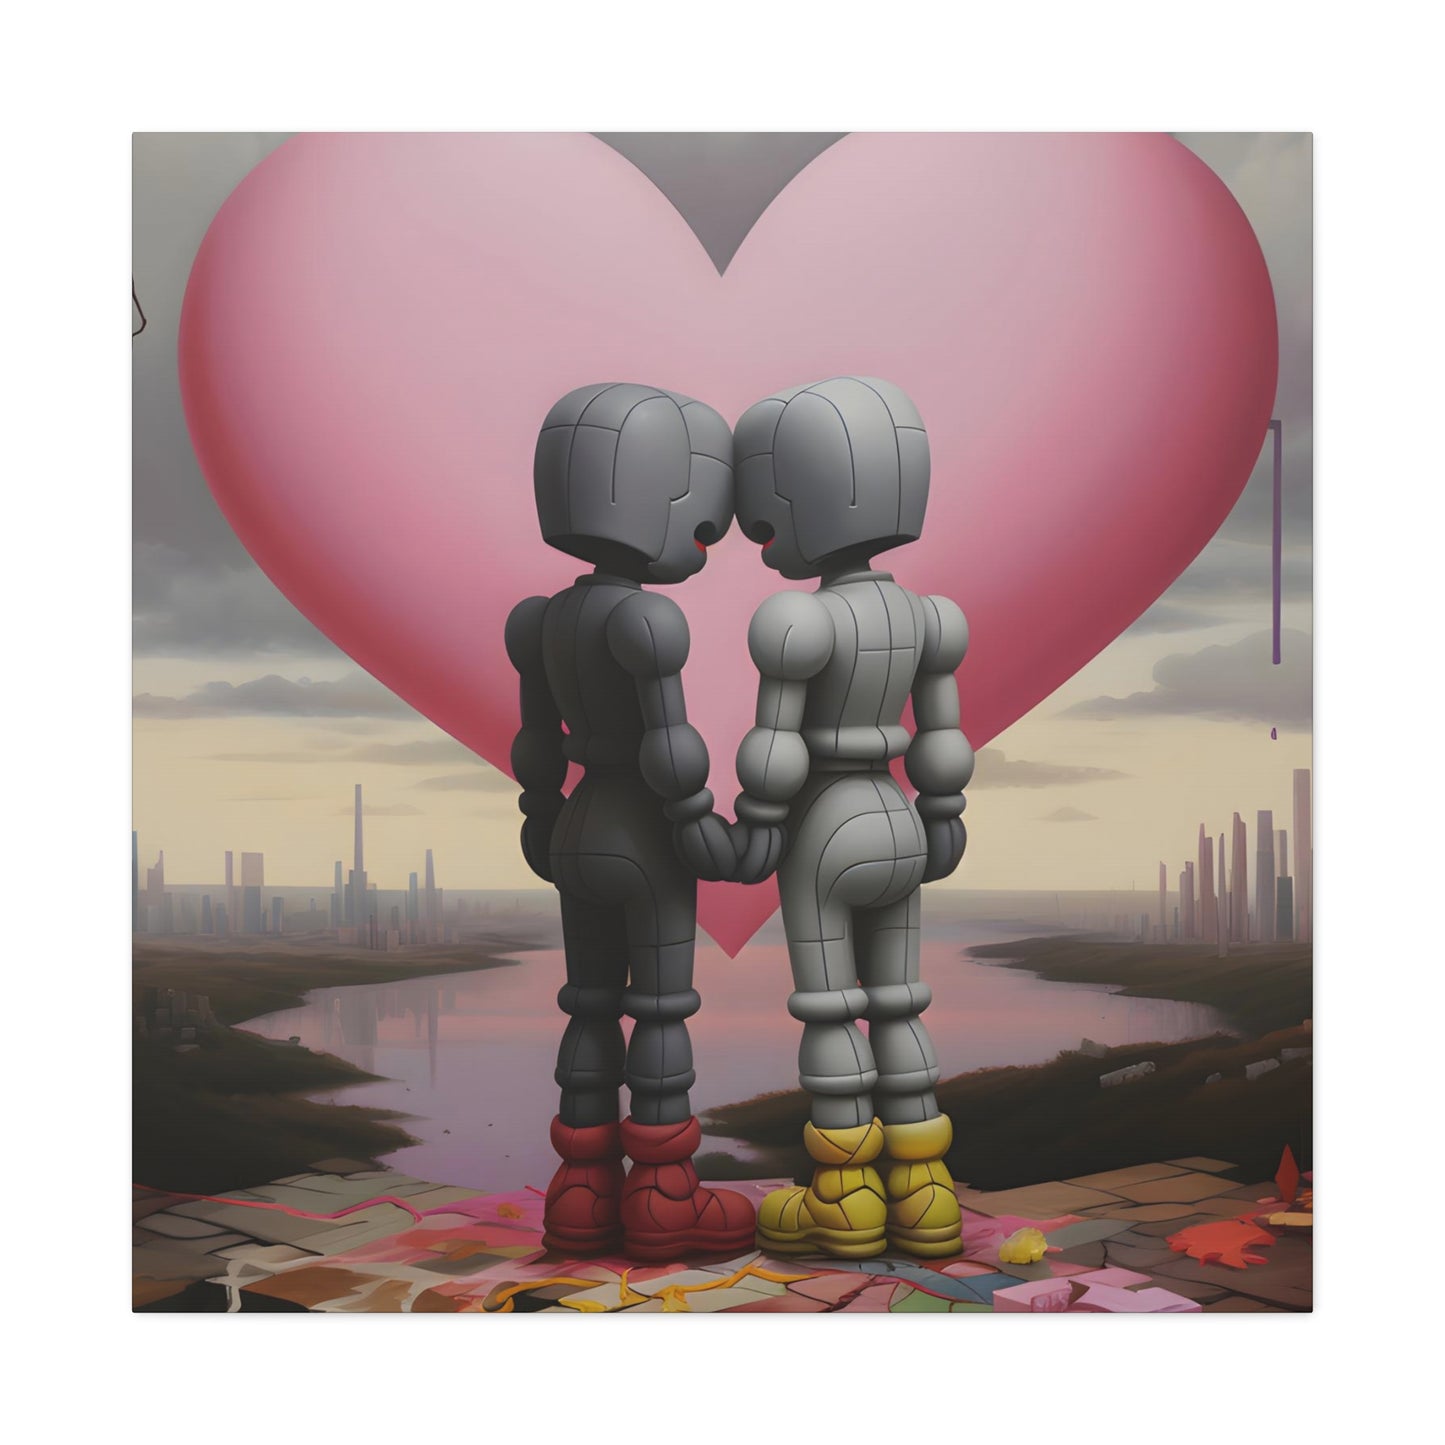 image 5 large. Contemporary artwork by Archer Dent, reflecting on connection in a mechanized era, blending urban surrealism with a tender embrace against a stark cityscape, provoking thoughts on love amidst modernity.